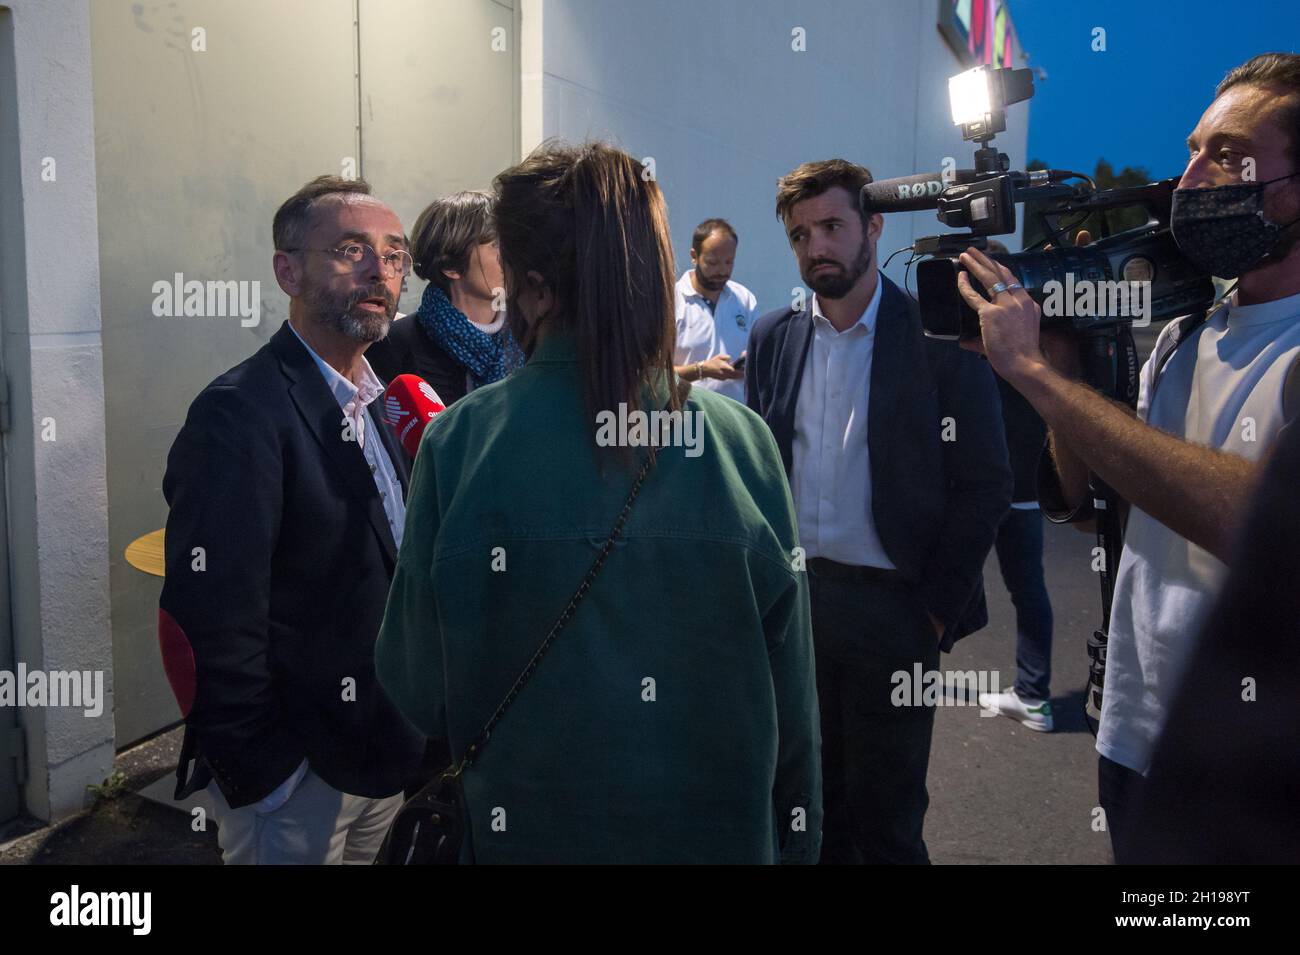 Beziers, France. 16th Oct, 2021. Robert Menard seen talking to the medias after the meeting of Eric Zemmour in Beziers.Robert Menard, close to the Rassemblement National of Marine Le Pen has invited Eric Zemmour to a dedication meeting on October 16, 2021. He insisted in his speech in a necessary alliance between Marine Le Pen and Eric Zemmour to make win the camp of the 'national right'. Credit: SOPA Images Limited/Alamy Live News Stock Photo